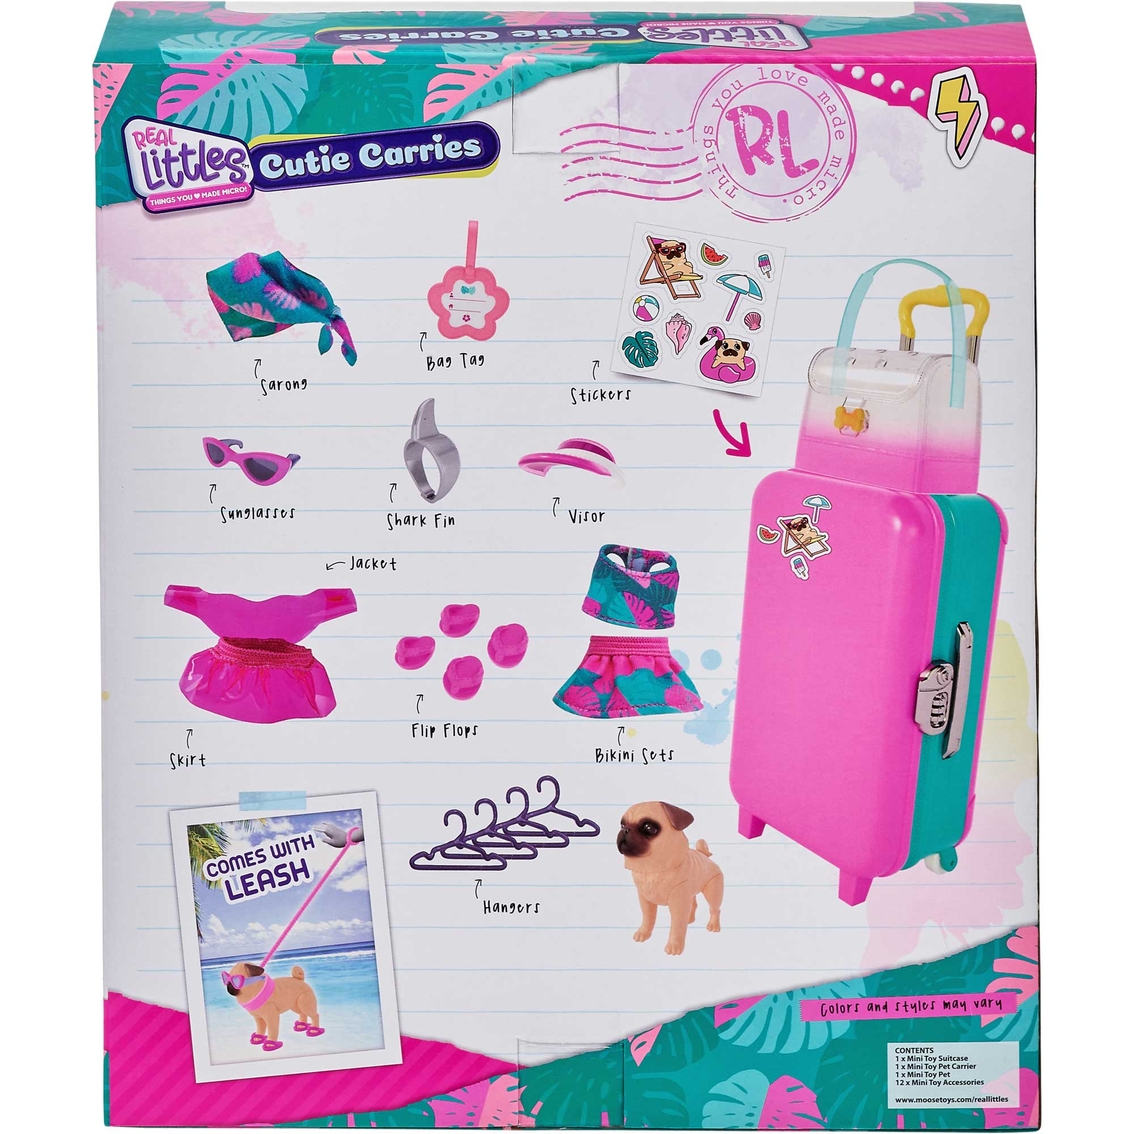 Moose Toys Real Littles Cutie Carries Pet Roller Case and Bag - Image 2 of 3